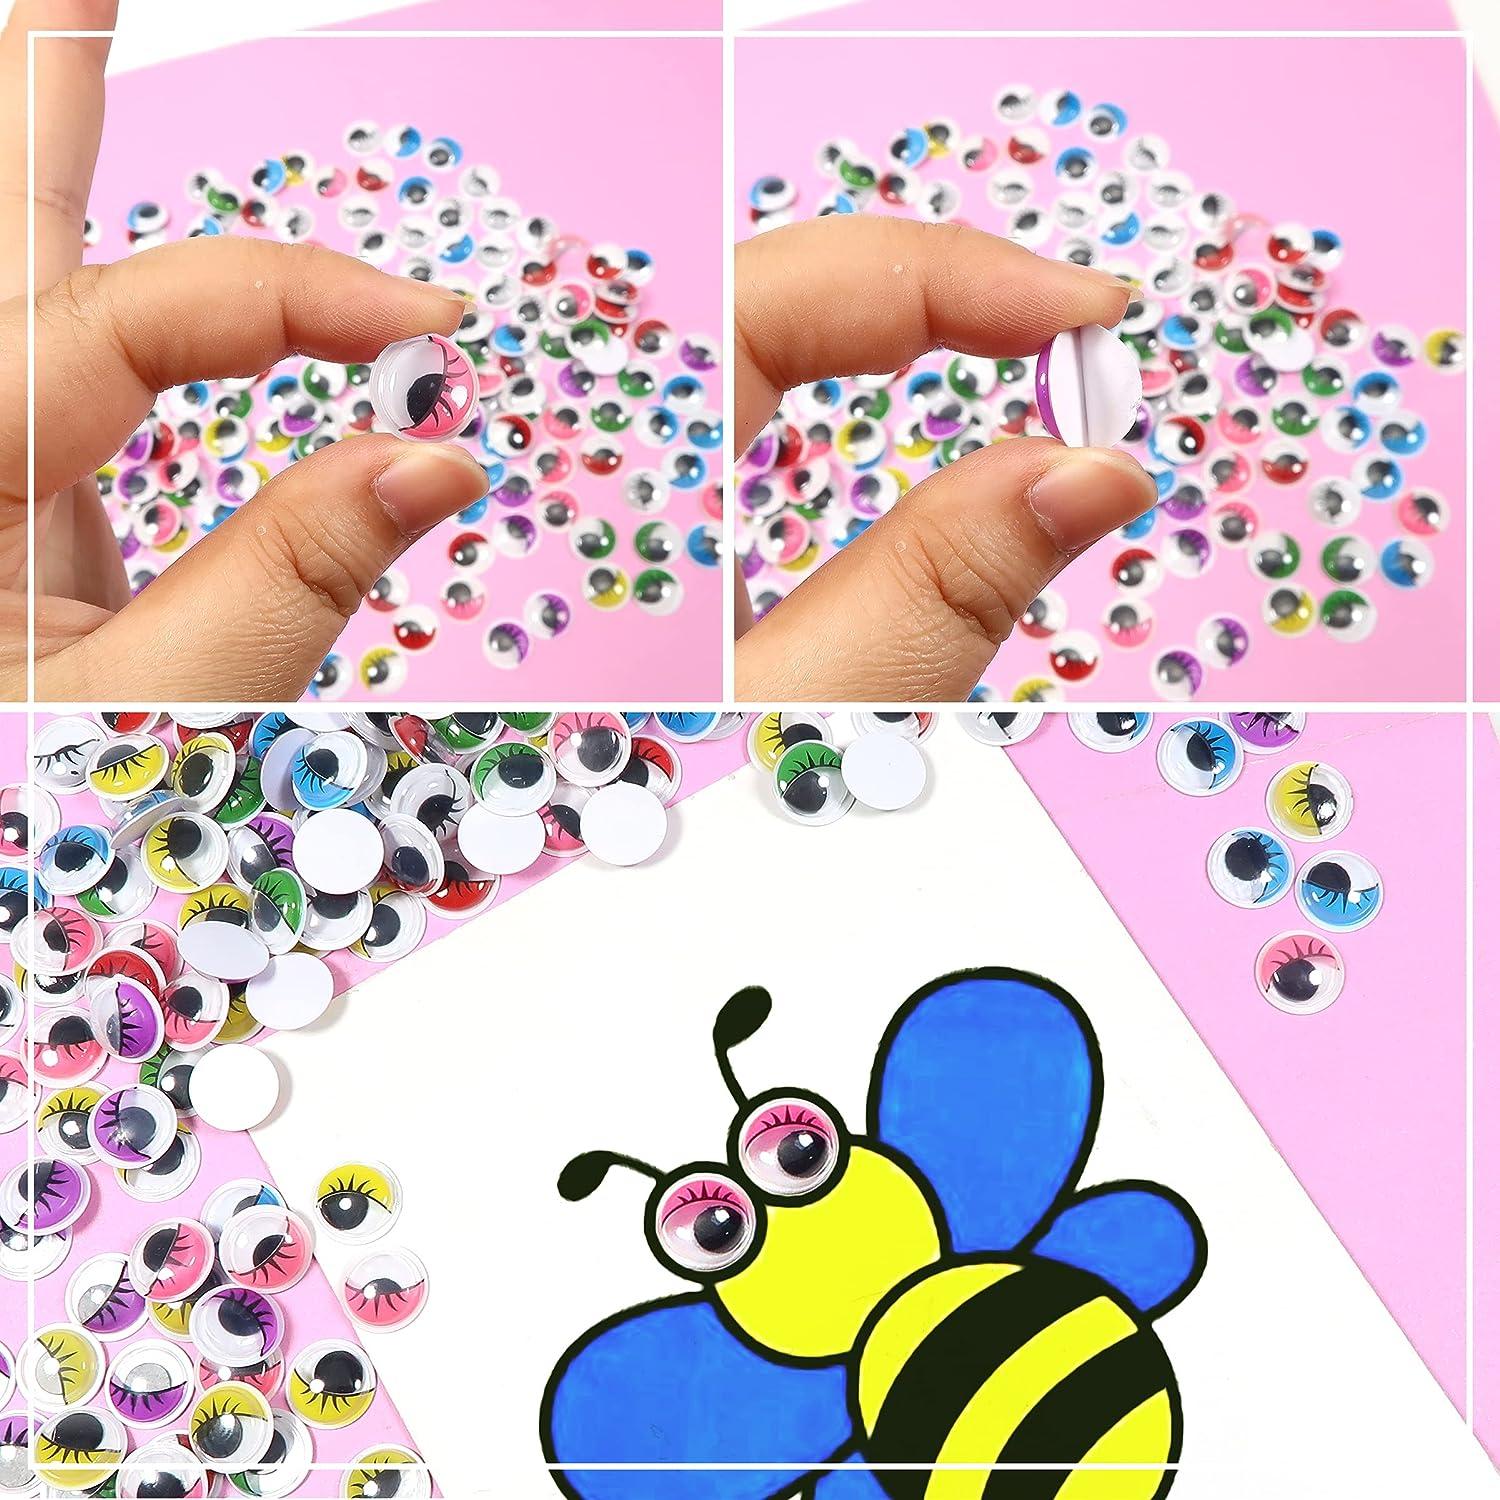 TOAOB 252pcs Wiggle Googly Eyes Self Adhesive with Eyelashes Oval Assorted Colors 10x13mm Craft Eyes Plastic Sticker Eyes for DIY Crafts Scrapbooking